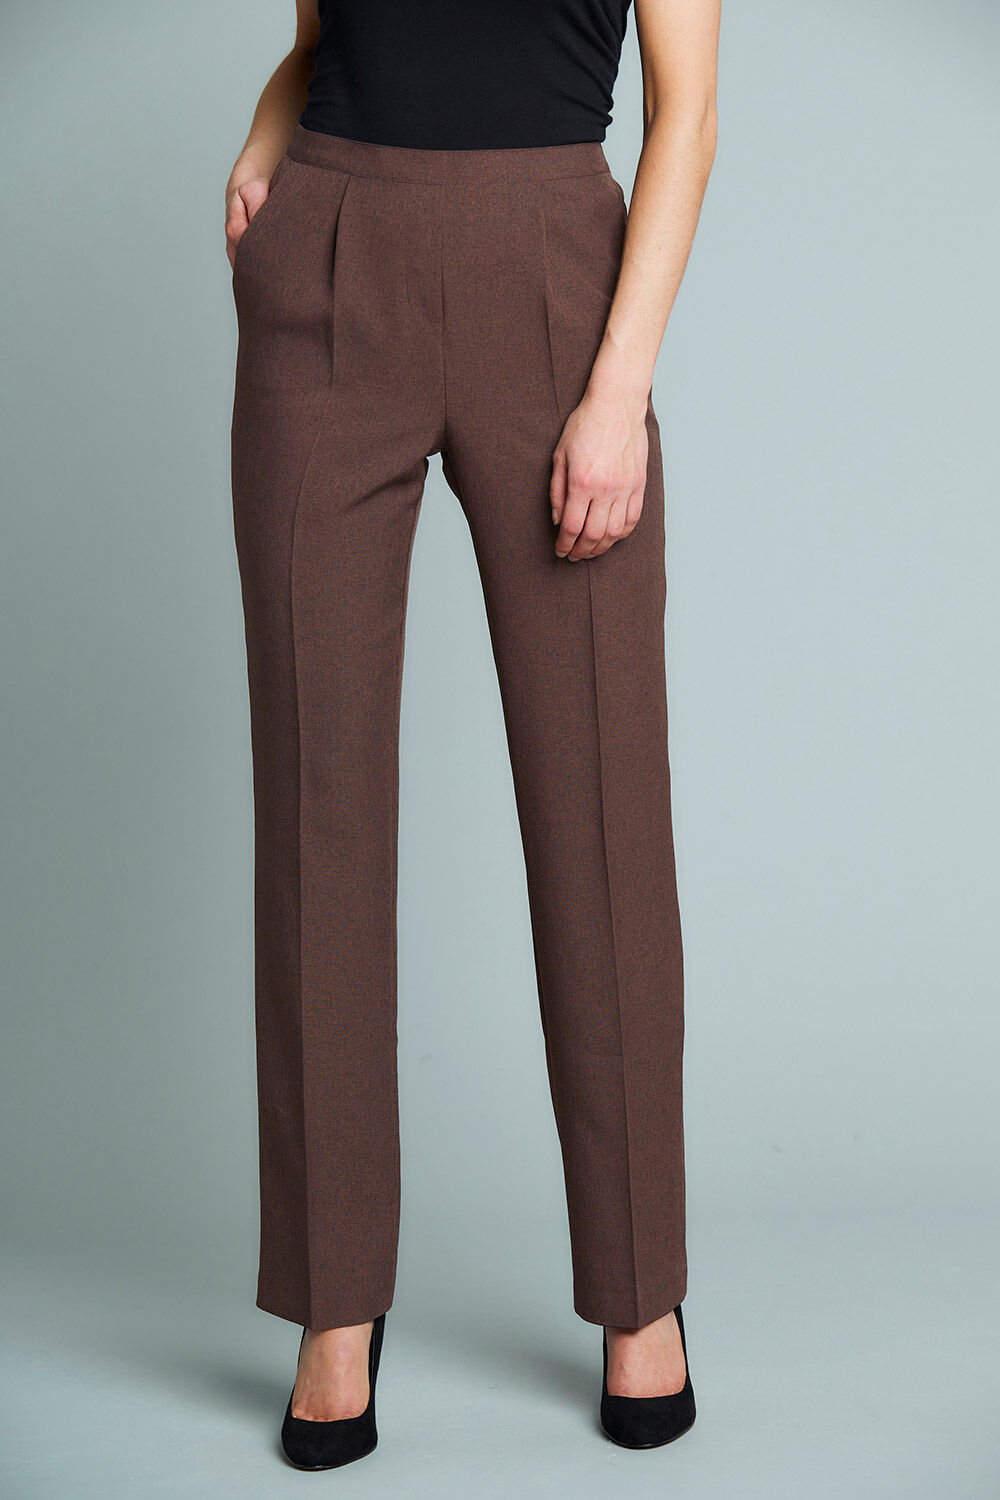 Bonmarche Brown Straight Leg Pull-On Elasticated Trousers